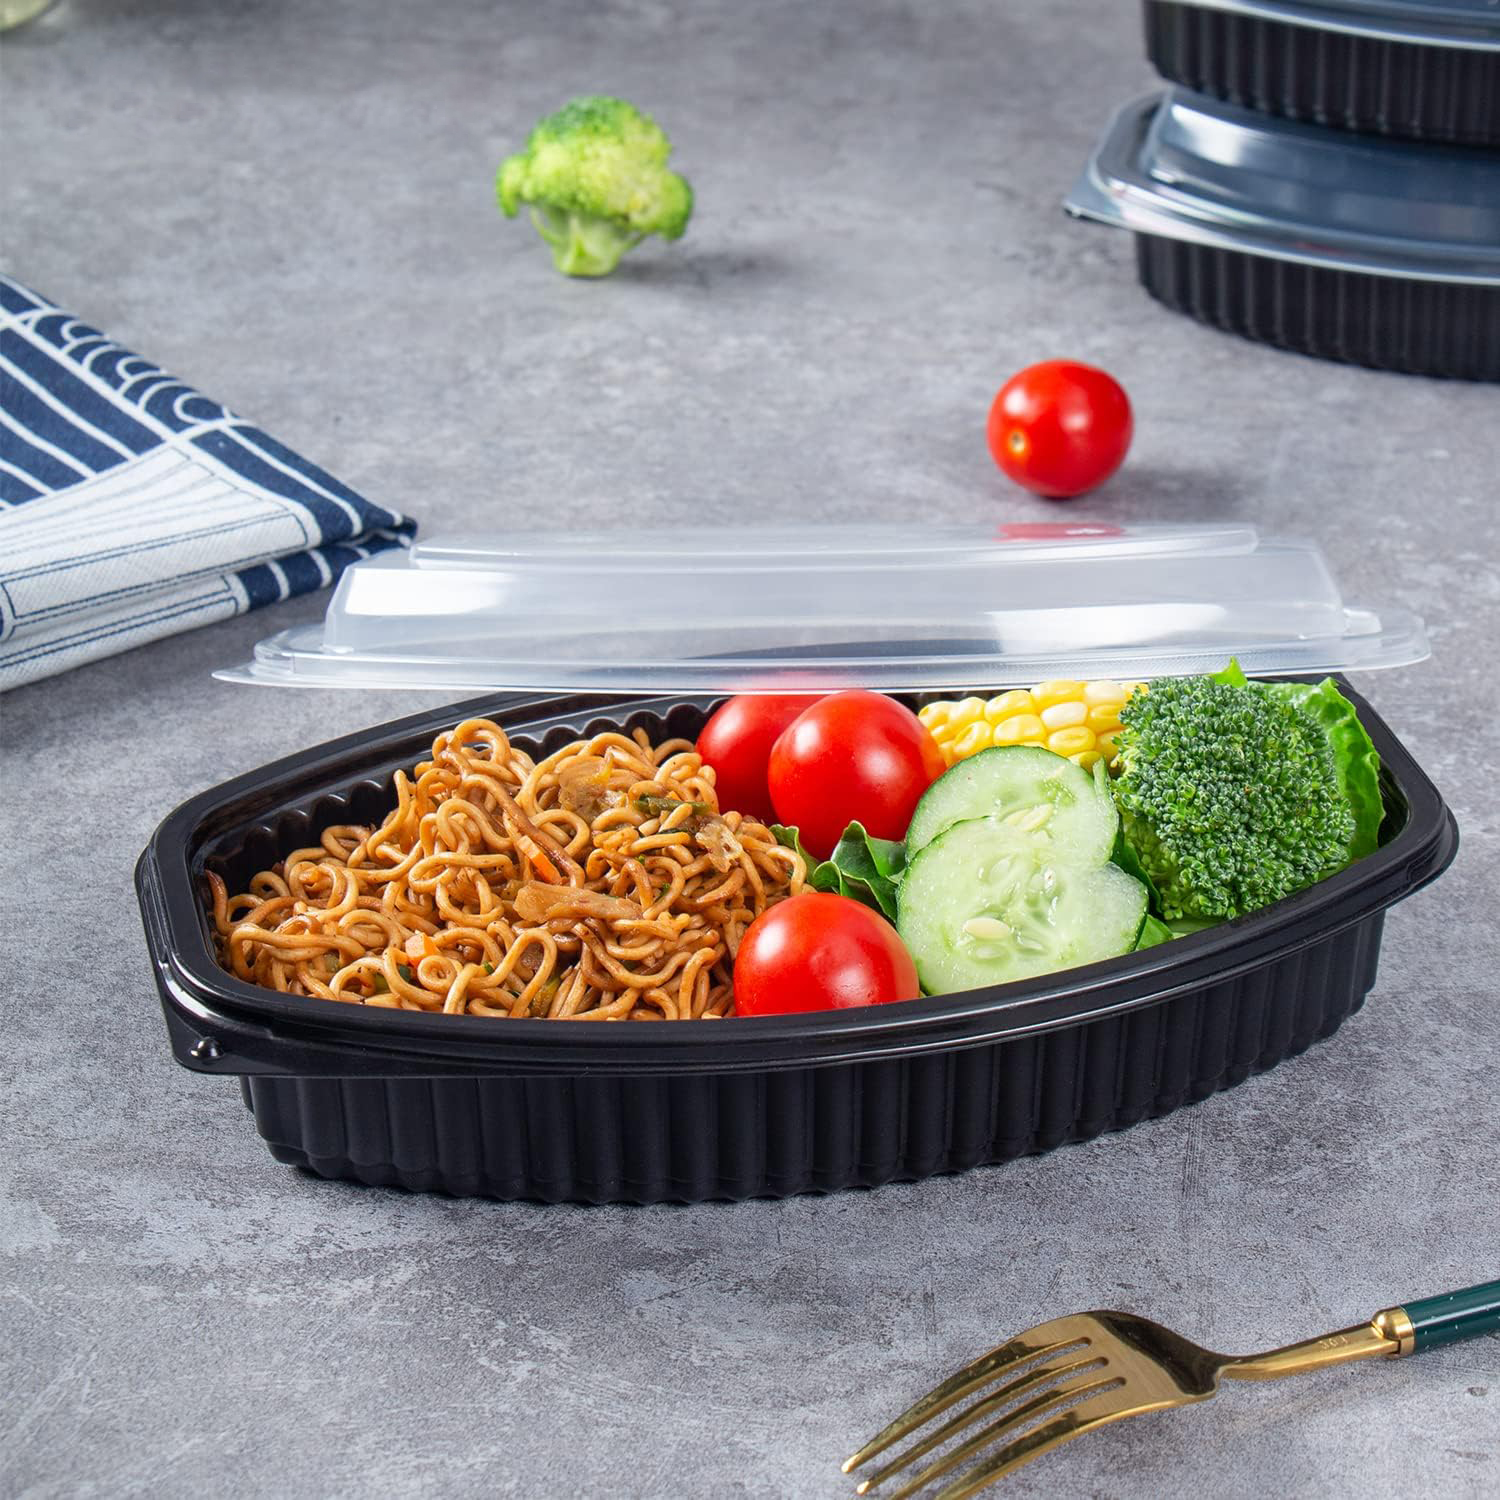 Microwavable Containers：Revolutionizing in Takeout/